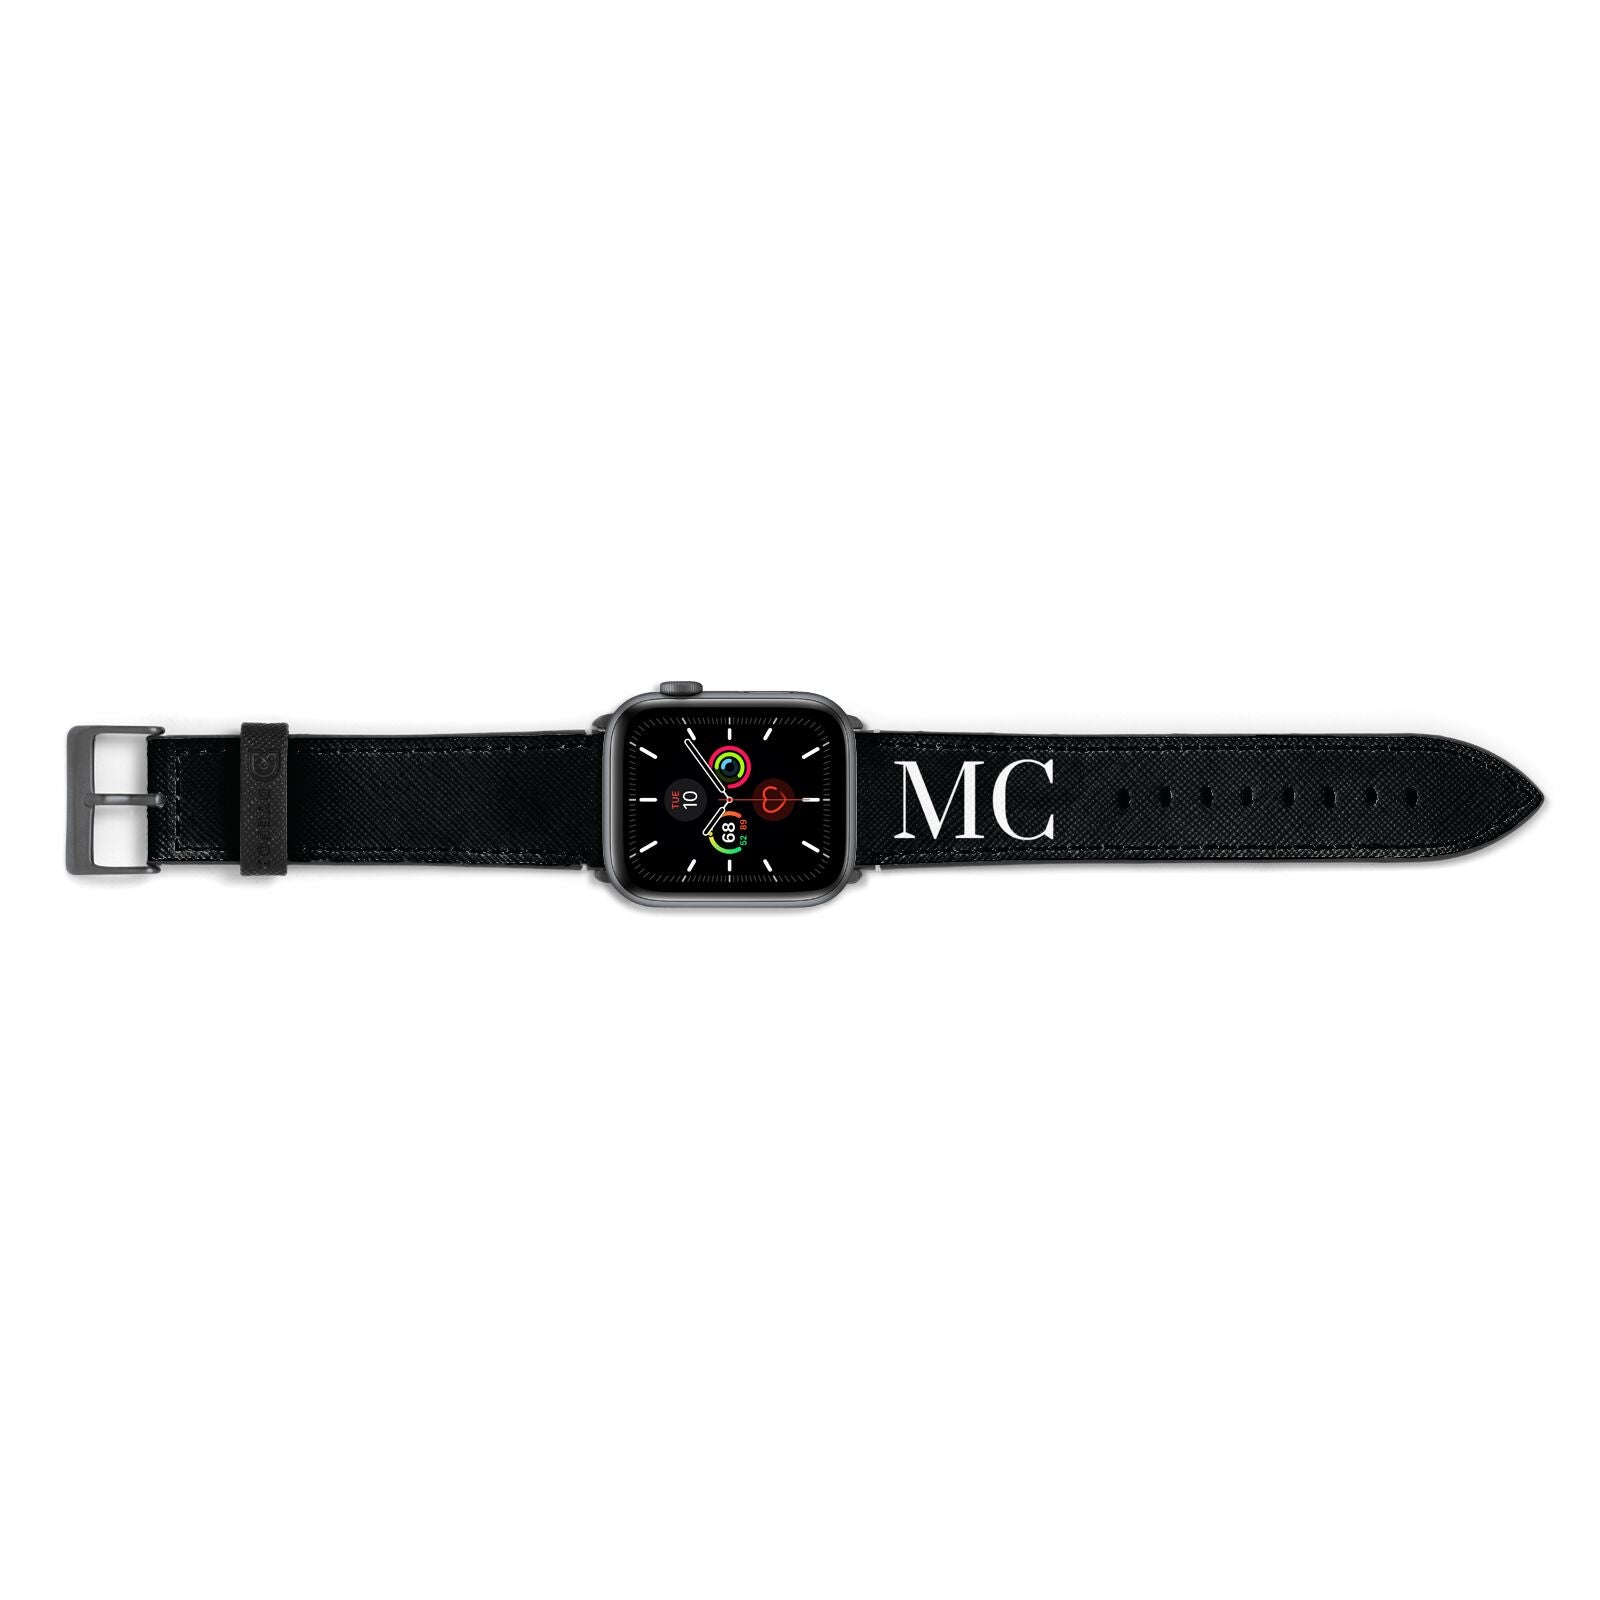 Initials Personalised 1 Apple Watch Strap Landscape Image Space Grey Hardware